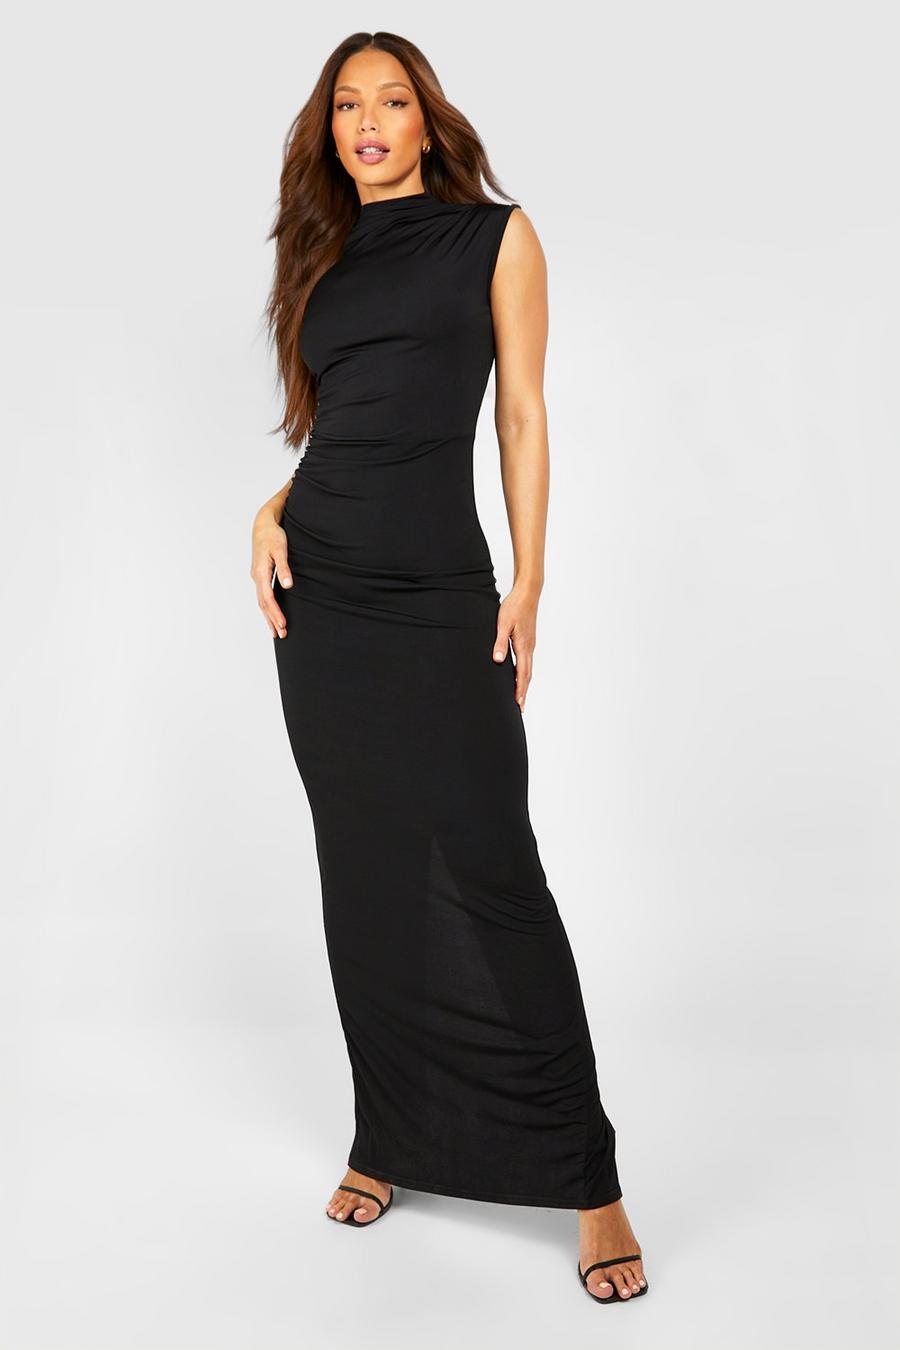 Black Tall Slinky High Neck Ruched Maxi Dress image number 1